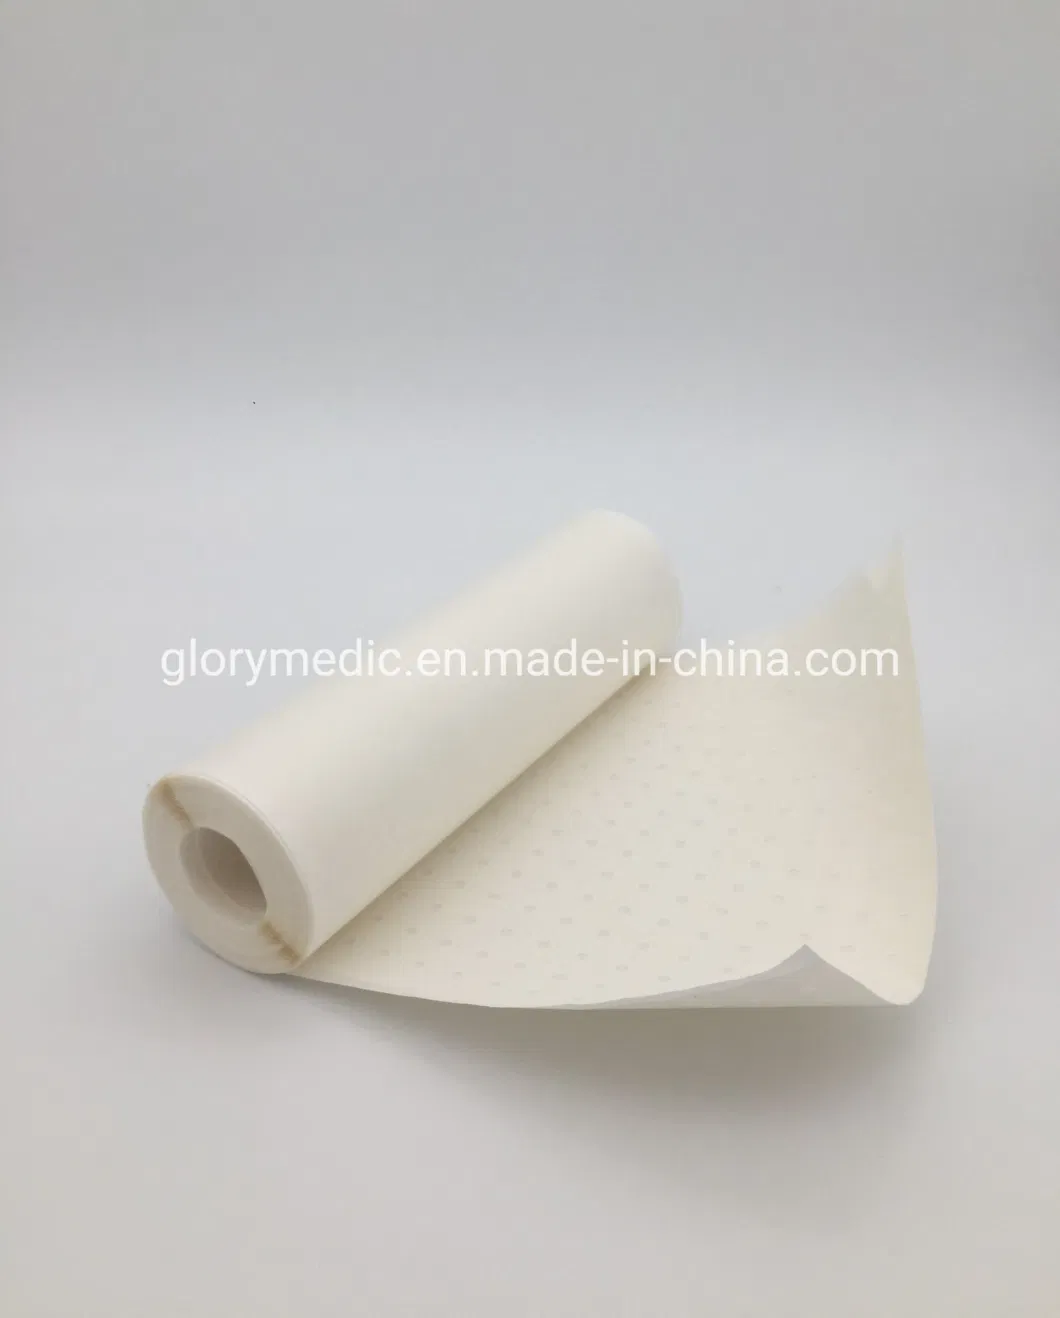 Zinc Oxide Skin Perforated Adhesive Plaster with Factory Price